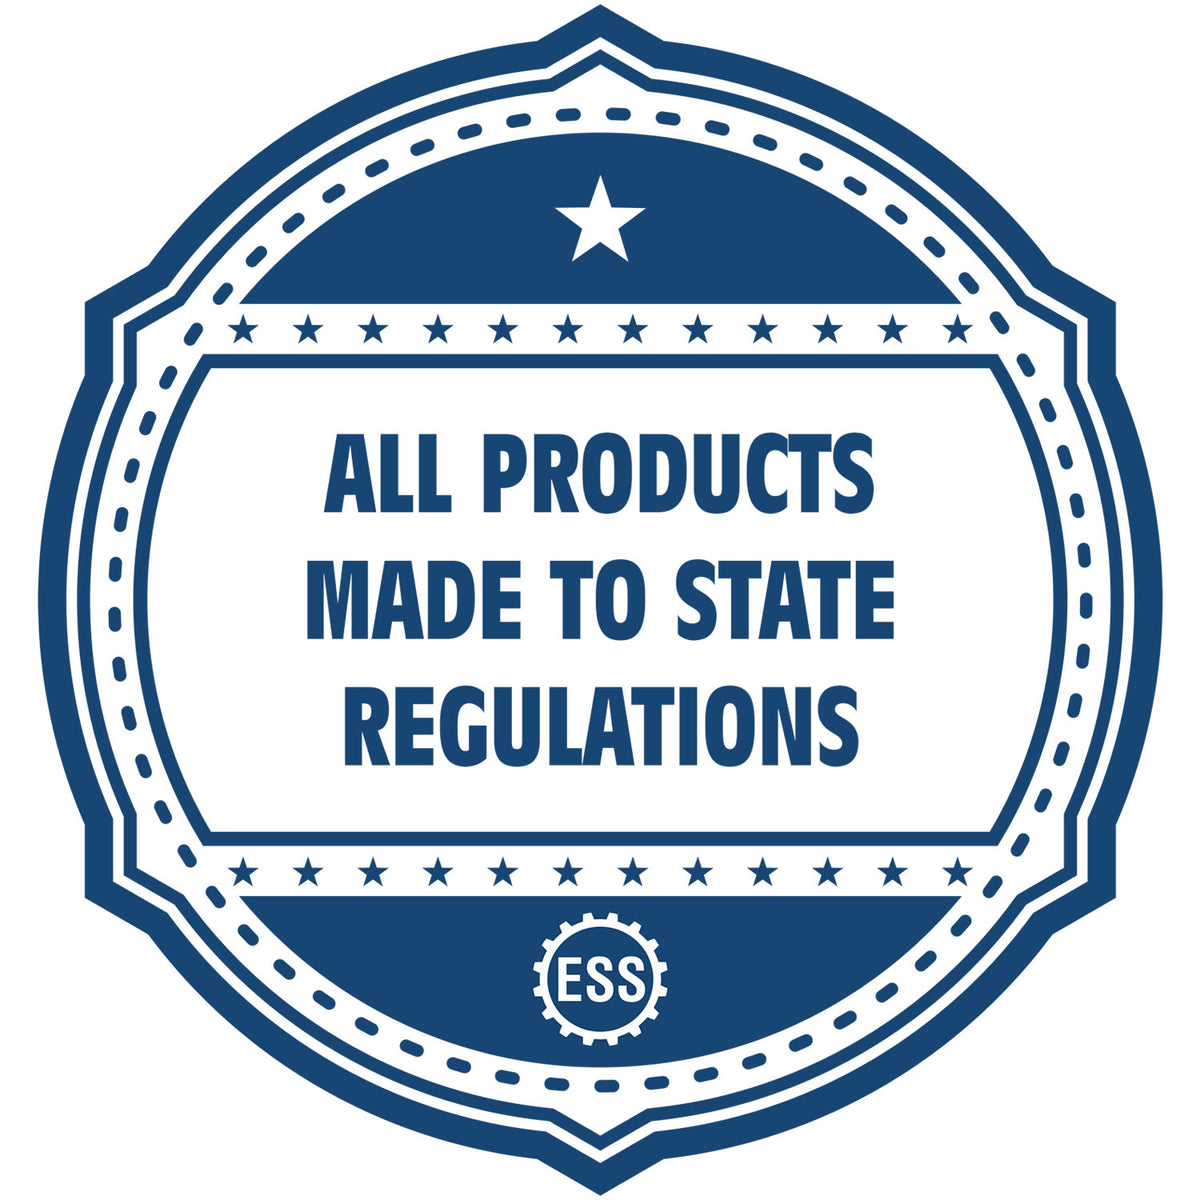 A blue icon or badge for the Hybrid New York Landscape Architect Seal showing that this product is made in compliance with state regulations.